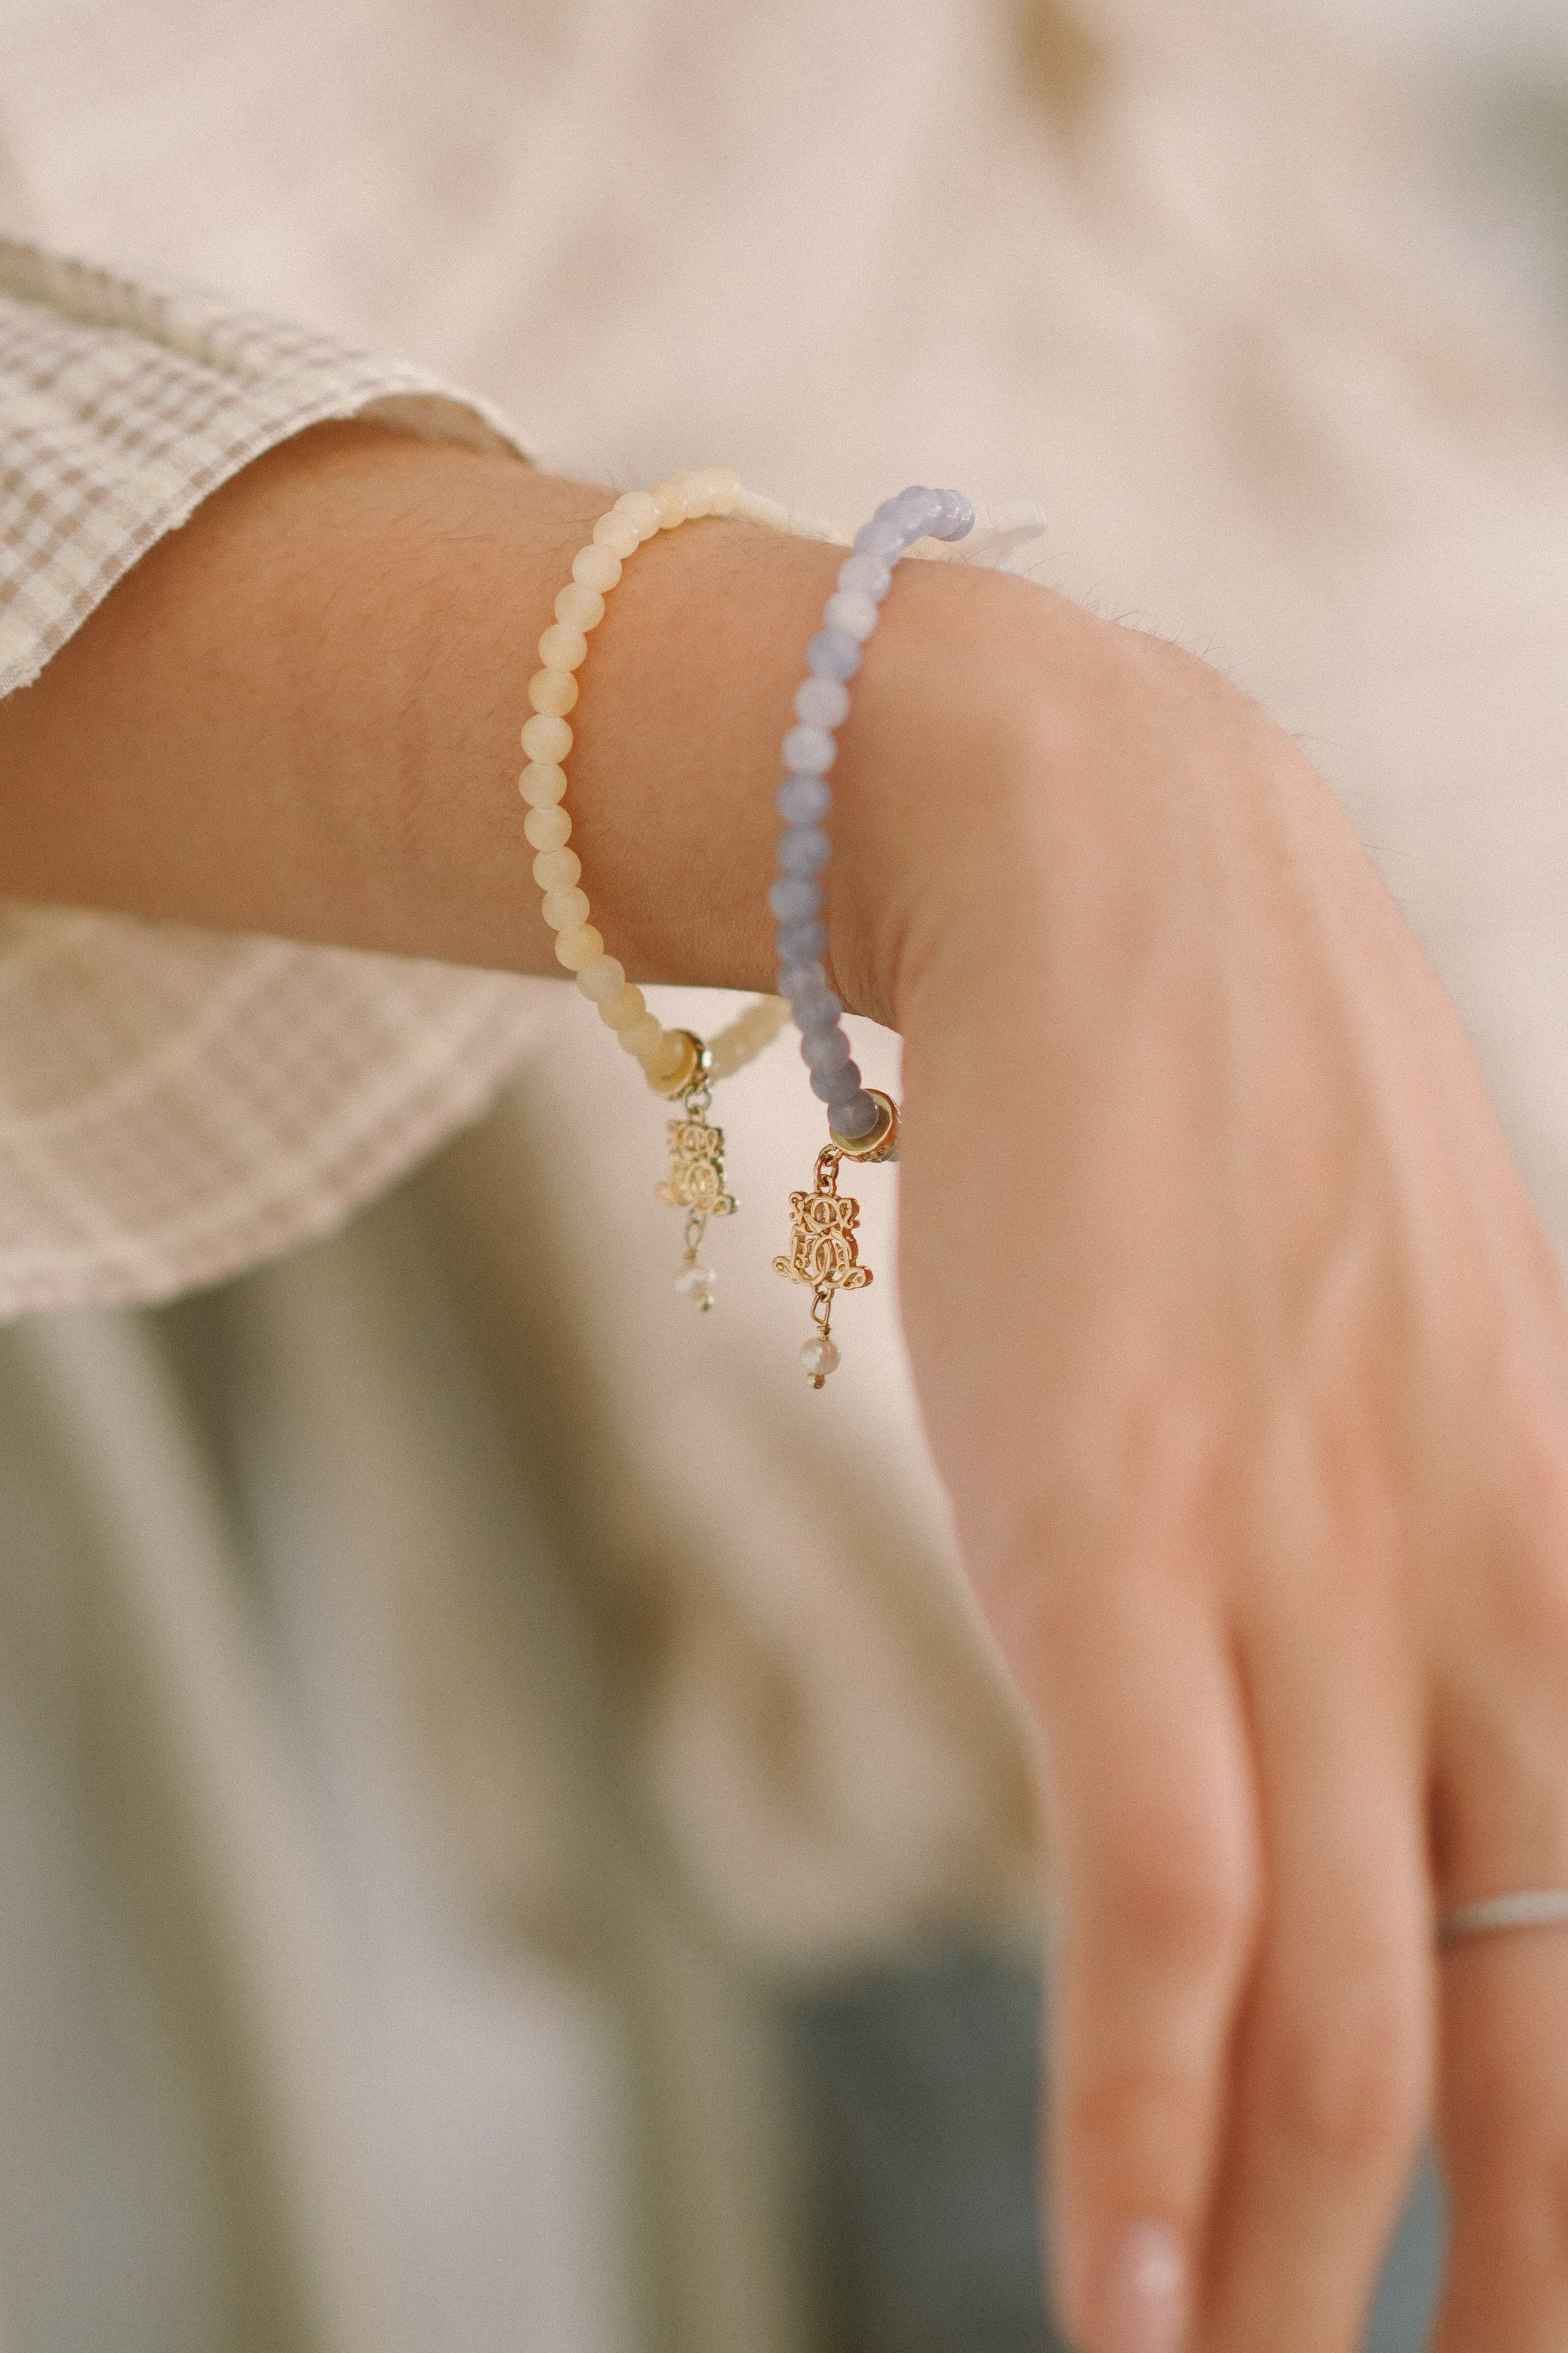 Bracelets worn by hand model for photoshoot